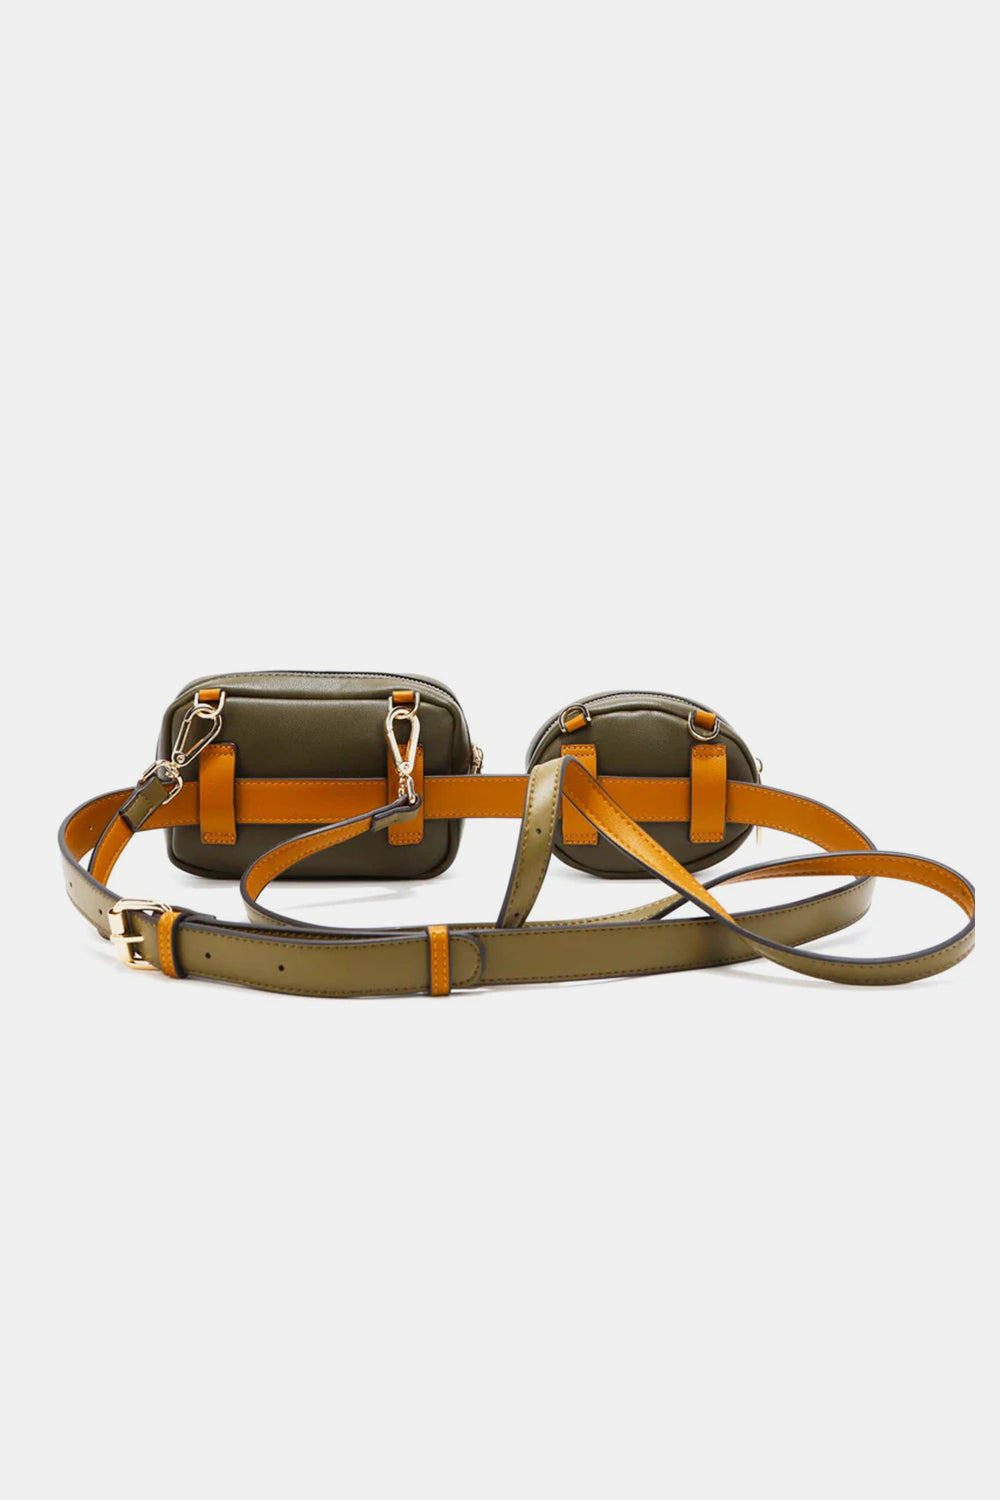 Life's Adventures Double Fanny Pack *6 colors*